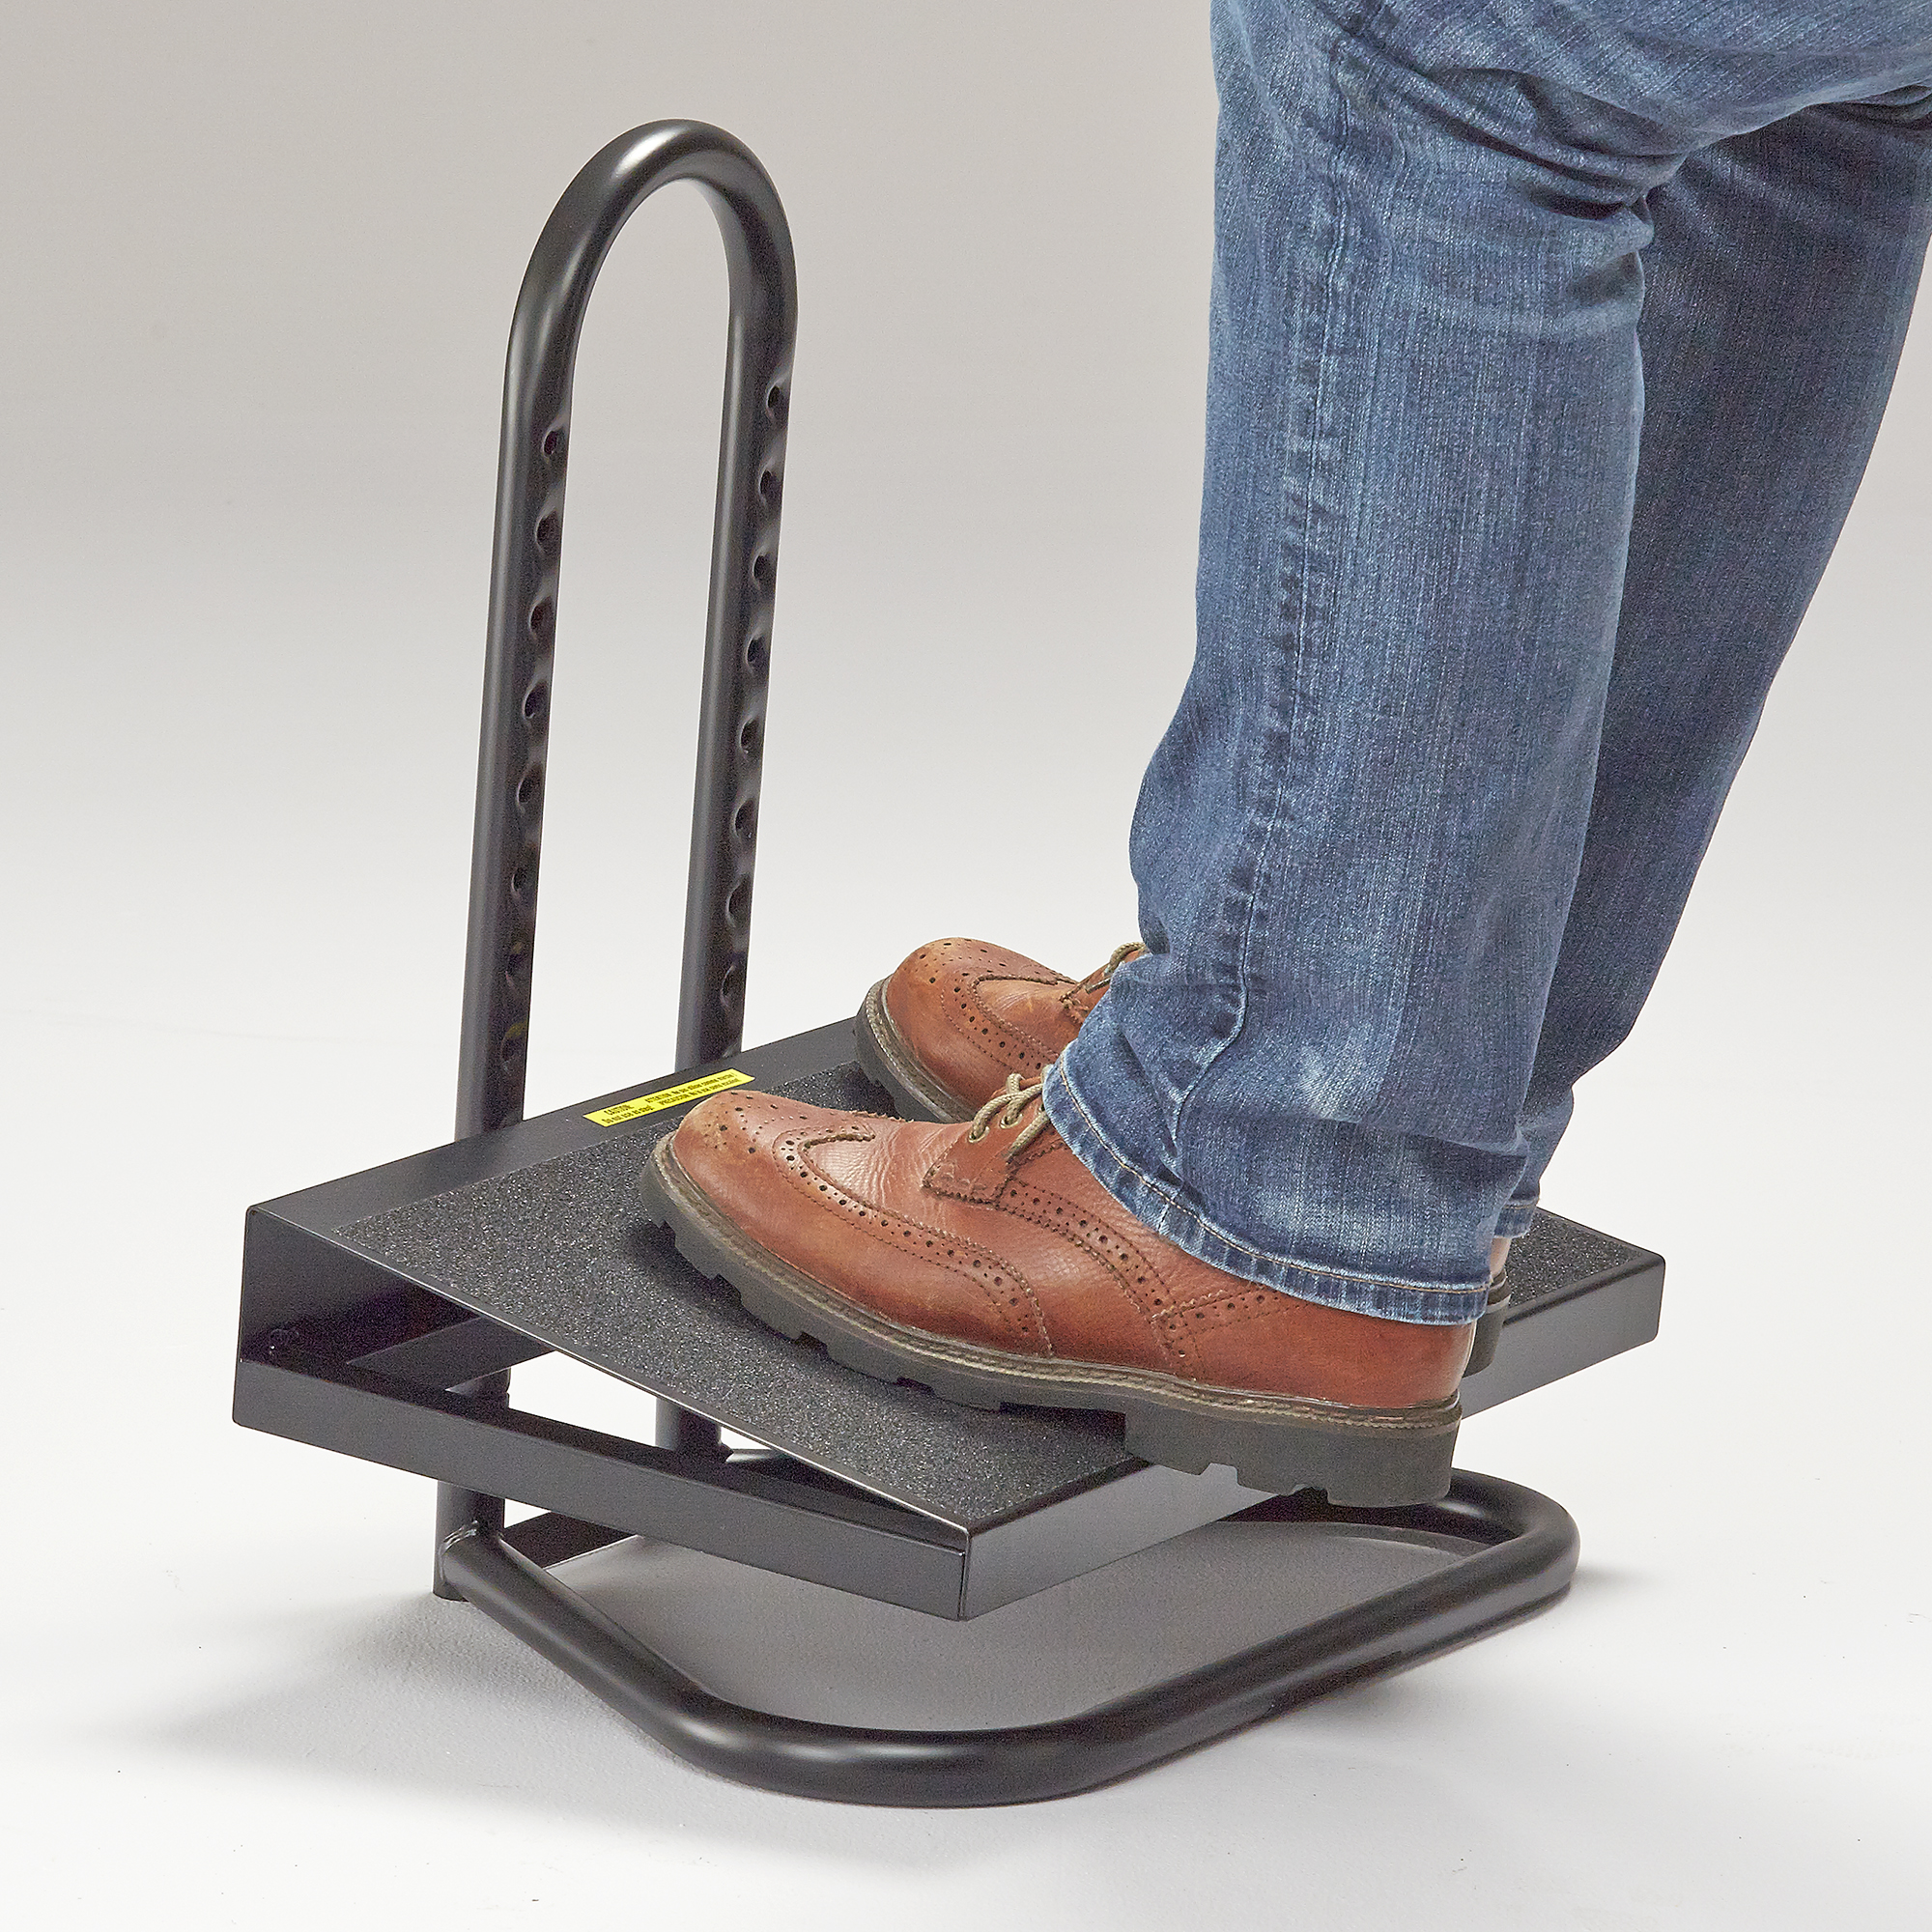 Get relief for your feet with this adjustable footrest. –